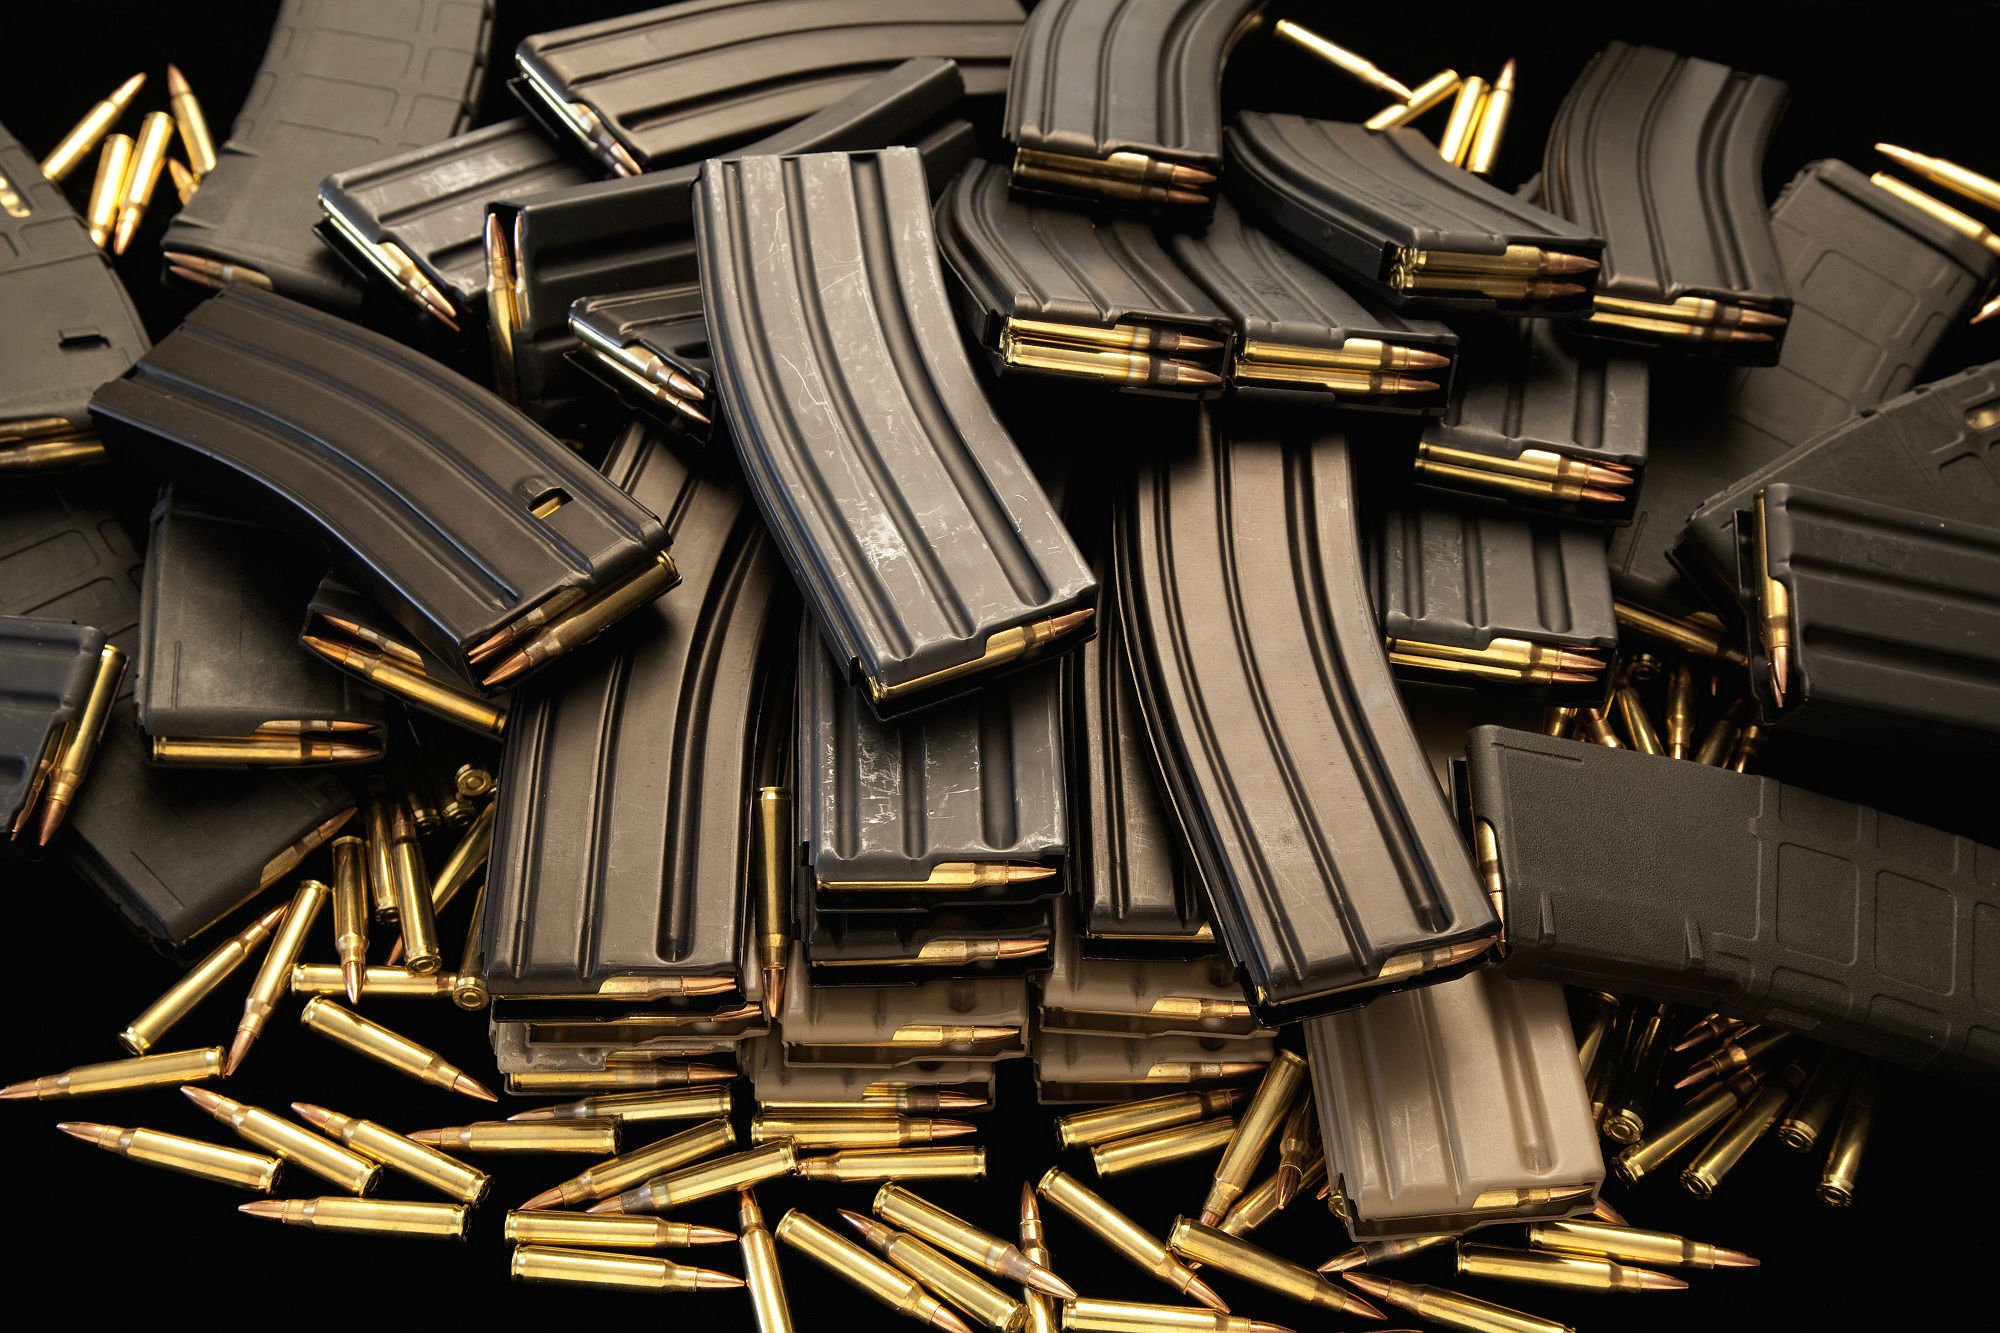 Weapons Guns Ammo Ammunition Military Police Wallpaper Background